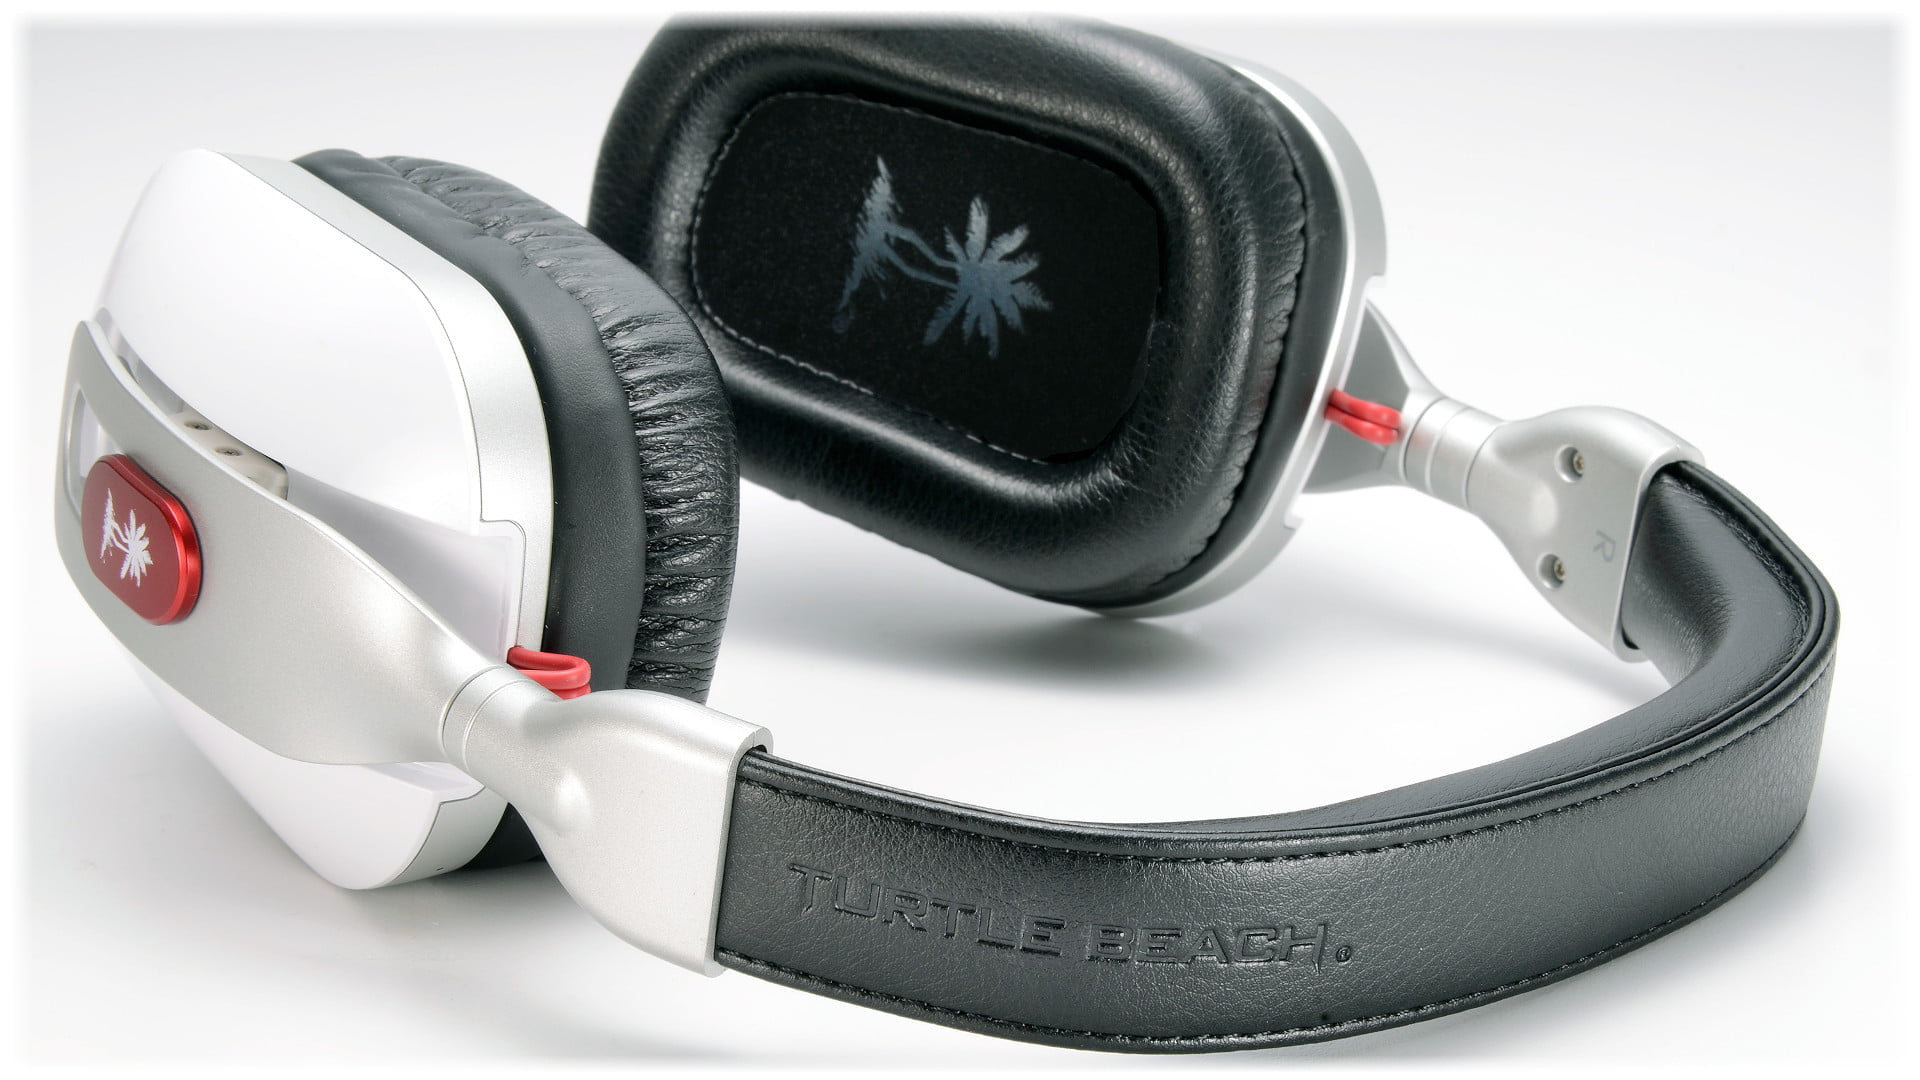 Turtle Beach Ear Force i60: The Best of Both Worlds